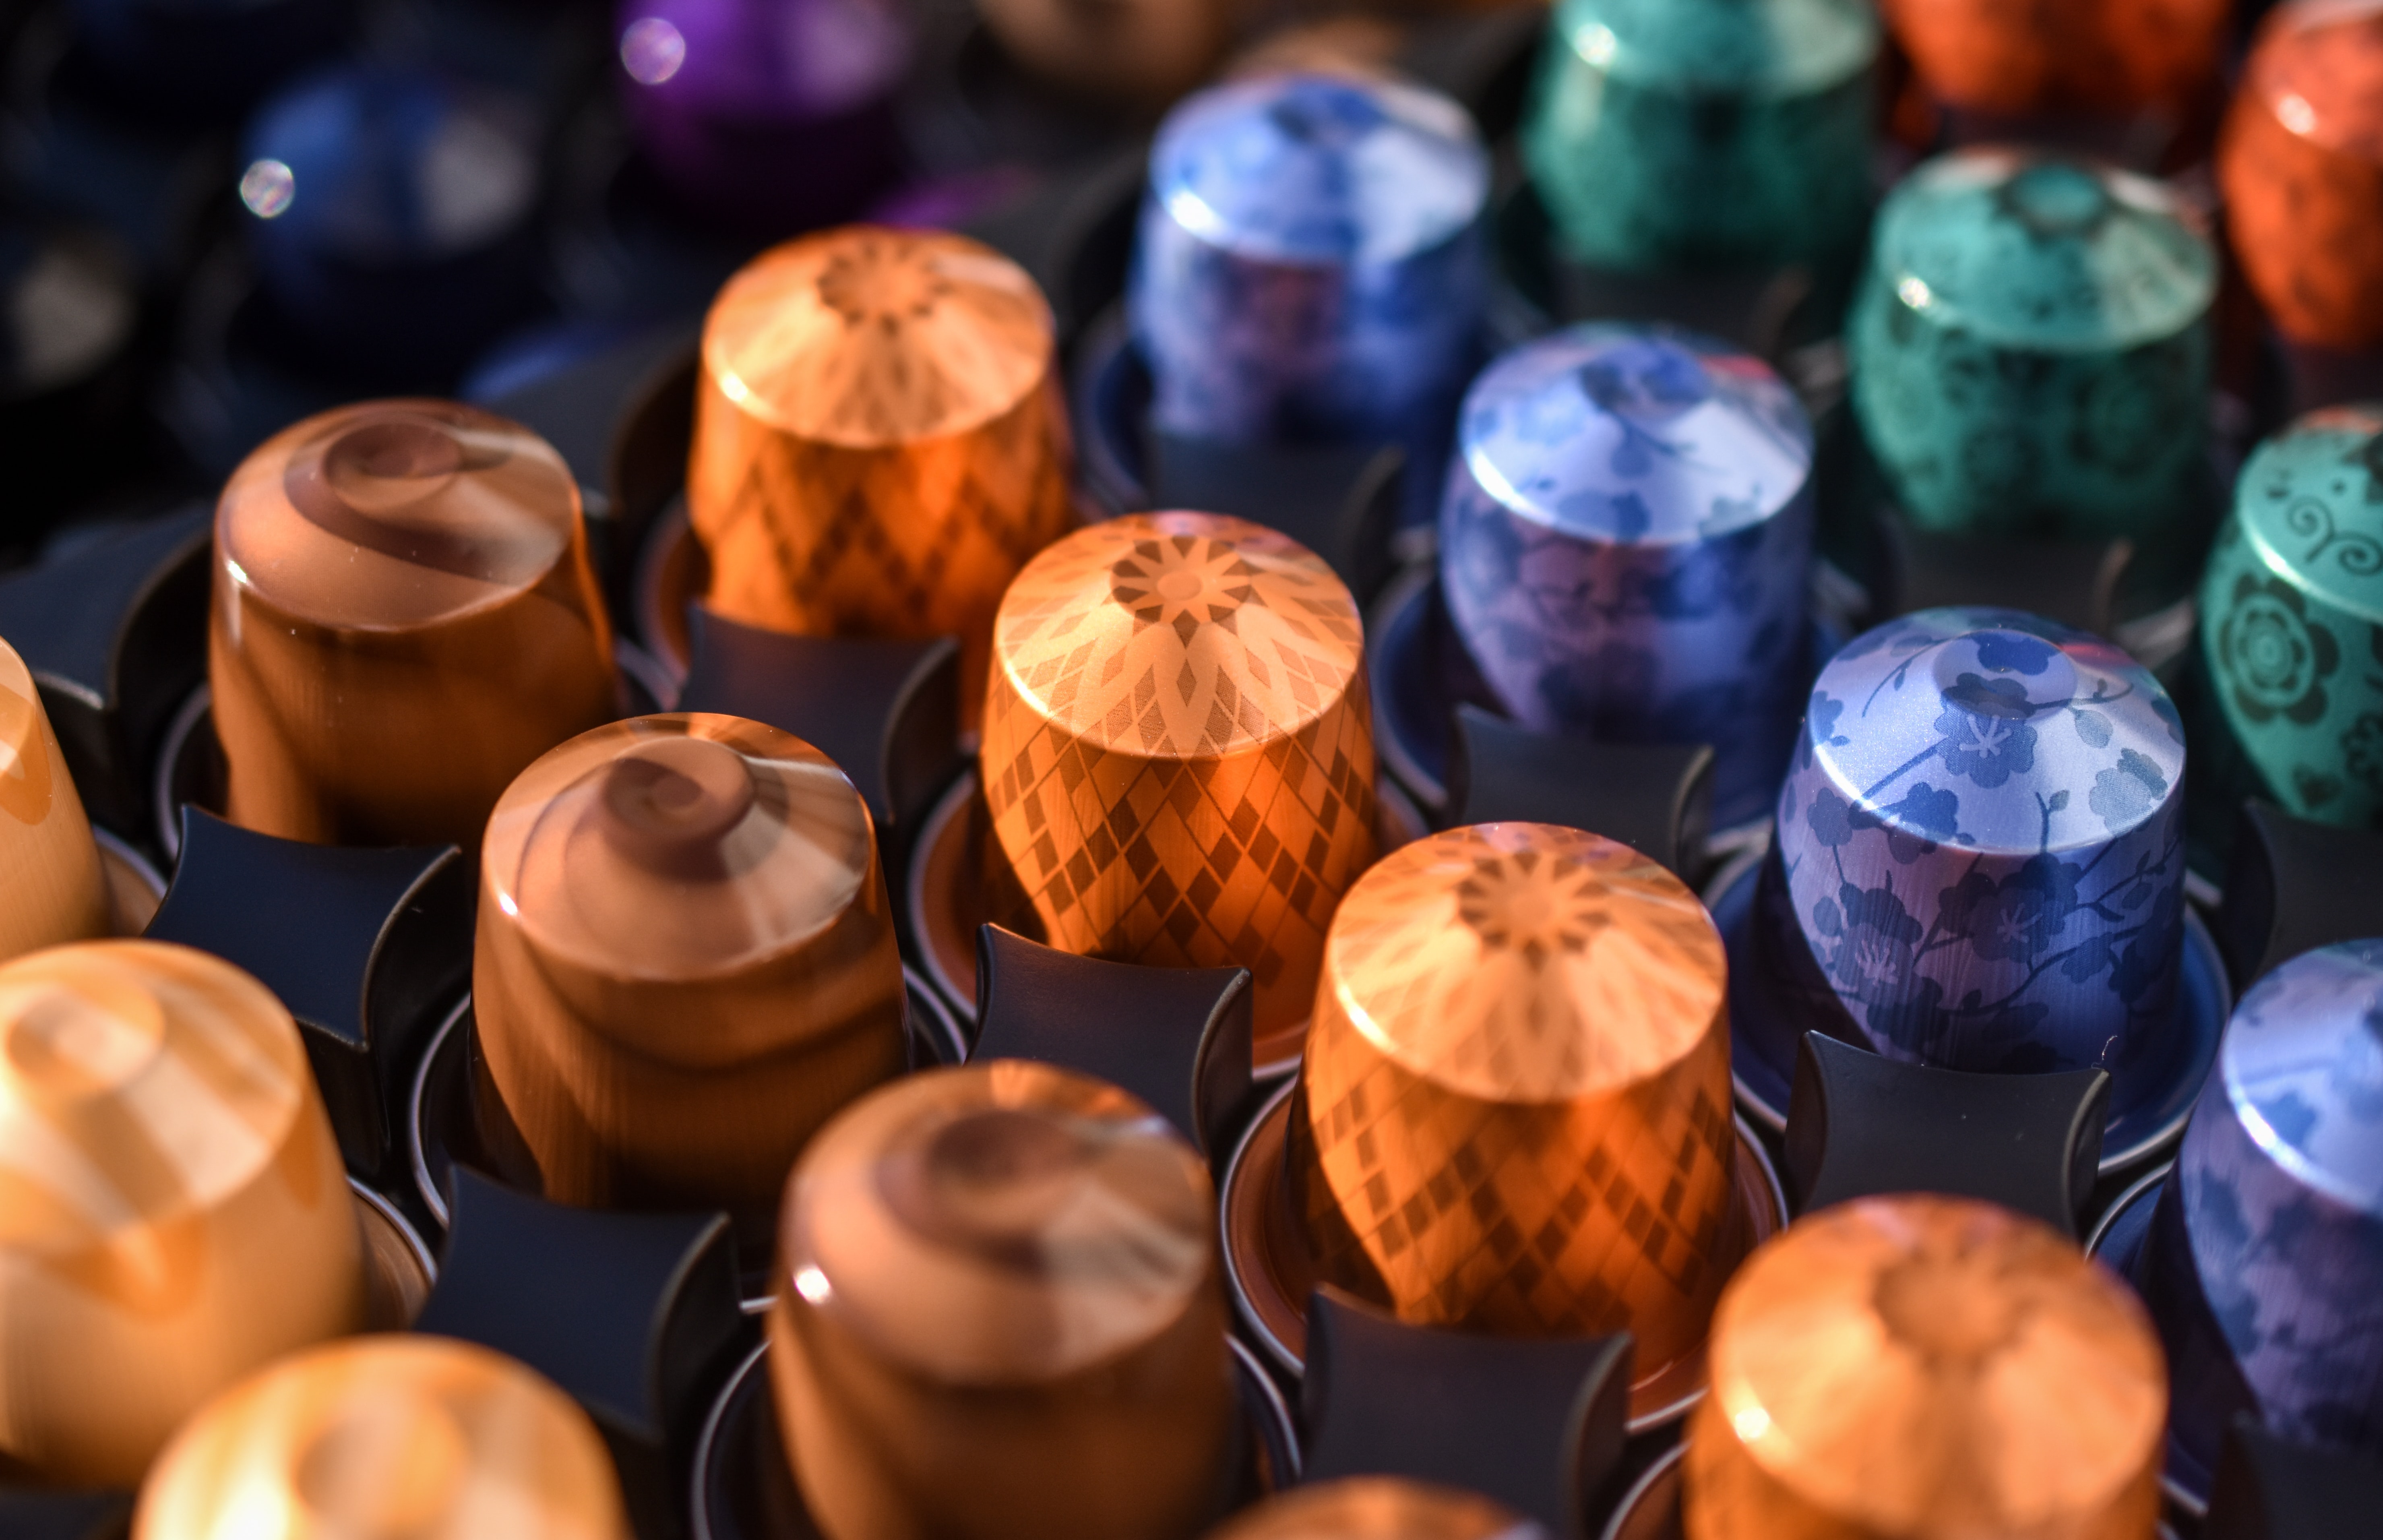 Wonderinterest | Nespresso is expanding its offer with a sustainable assortment